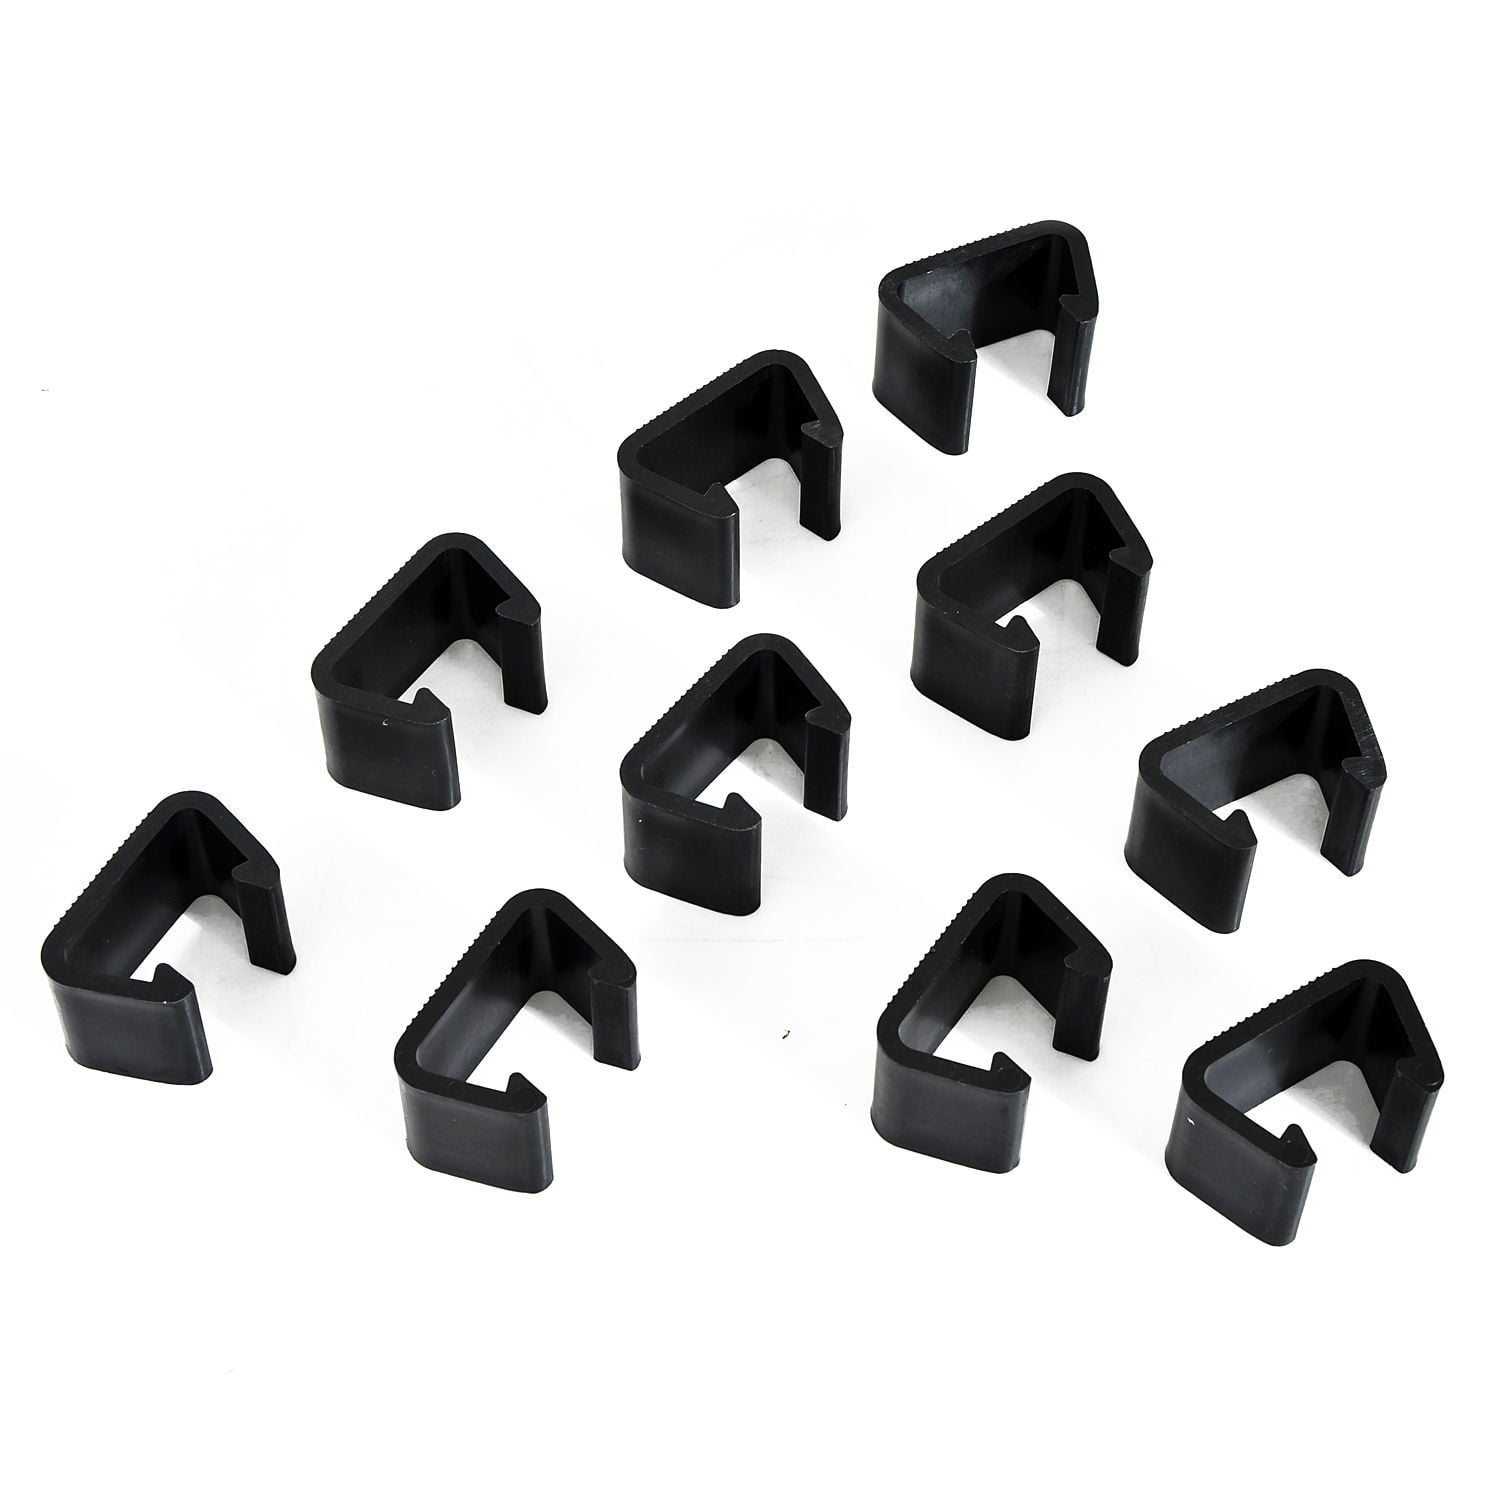 Zoyomax 12 Pack Patio Wicker Furniture Clips Outdoor Rattan Chair Fasteners Clips Garden Sectional Sofa Connector with 6 Pcs Self Adhesive Furniture Pads